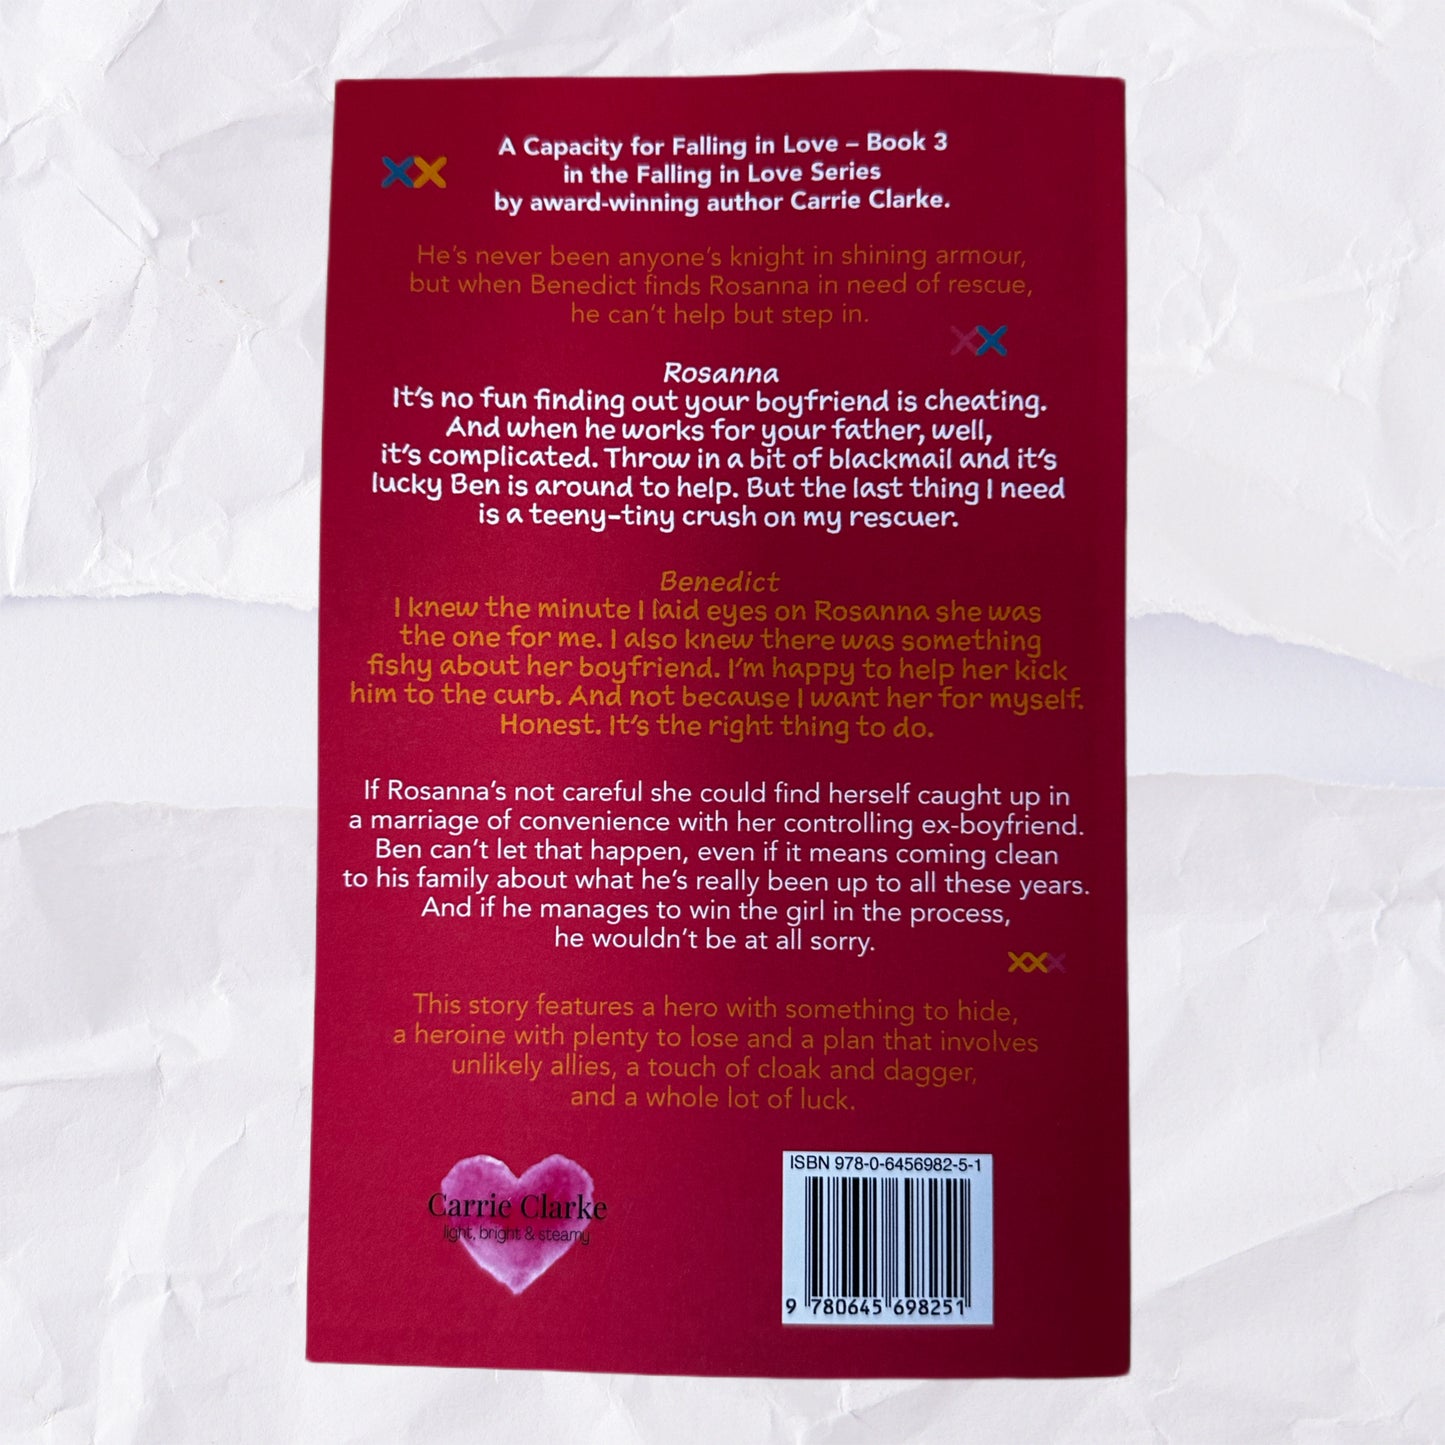 A Capacity for Falling in Love (Falling in Love #3) by Carrie Clarke - SIGNED COPIES